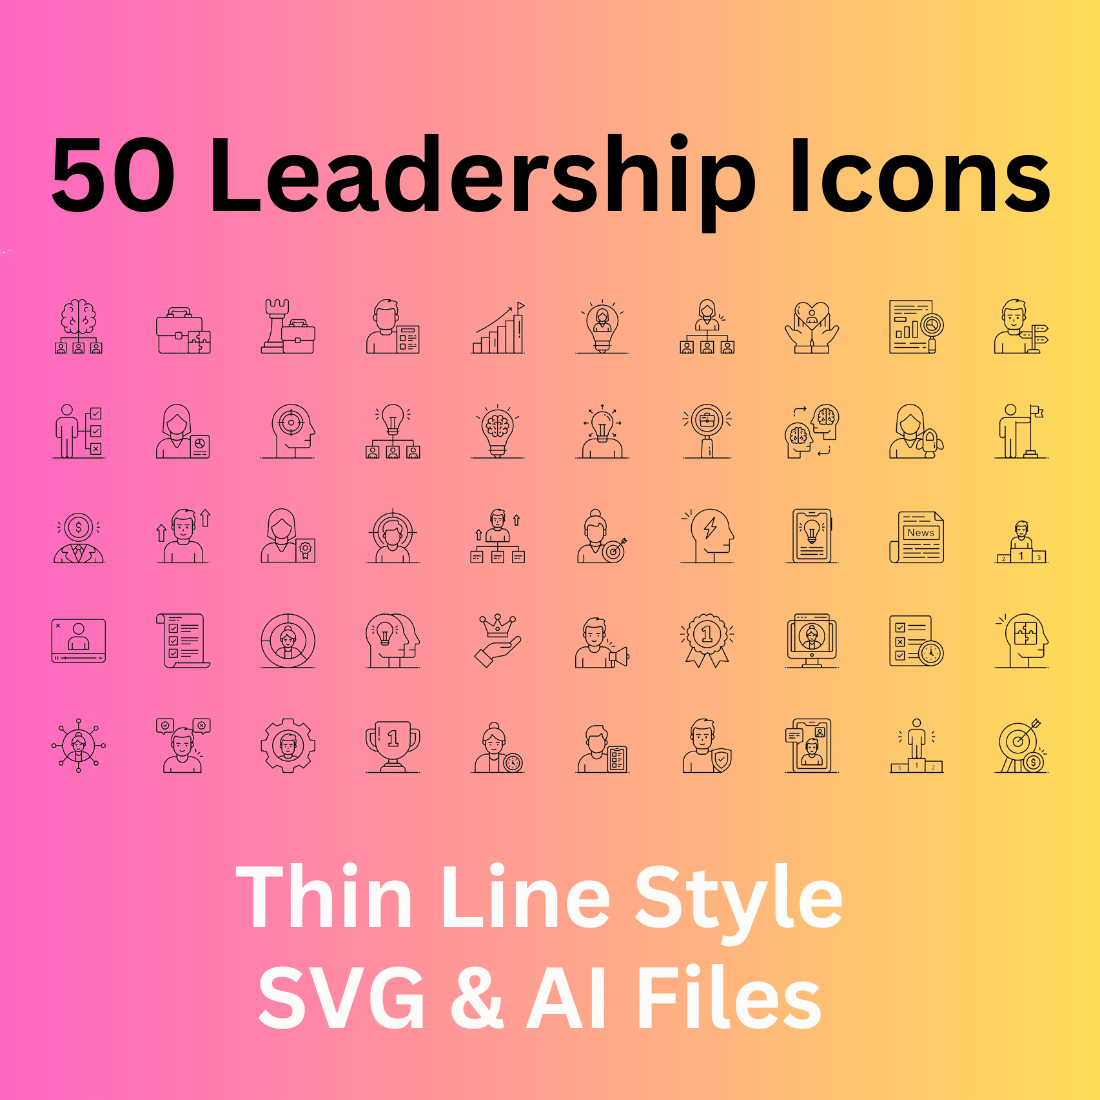 Leadership Icon Set 50 Outline Icons - SVG And AI Files cover image.